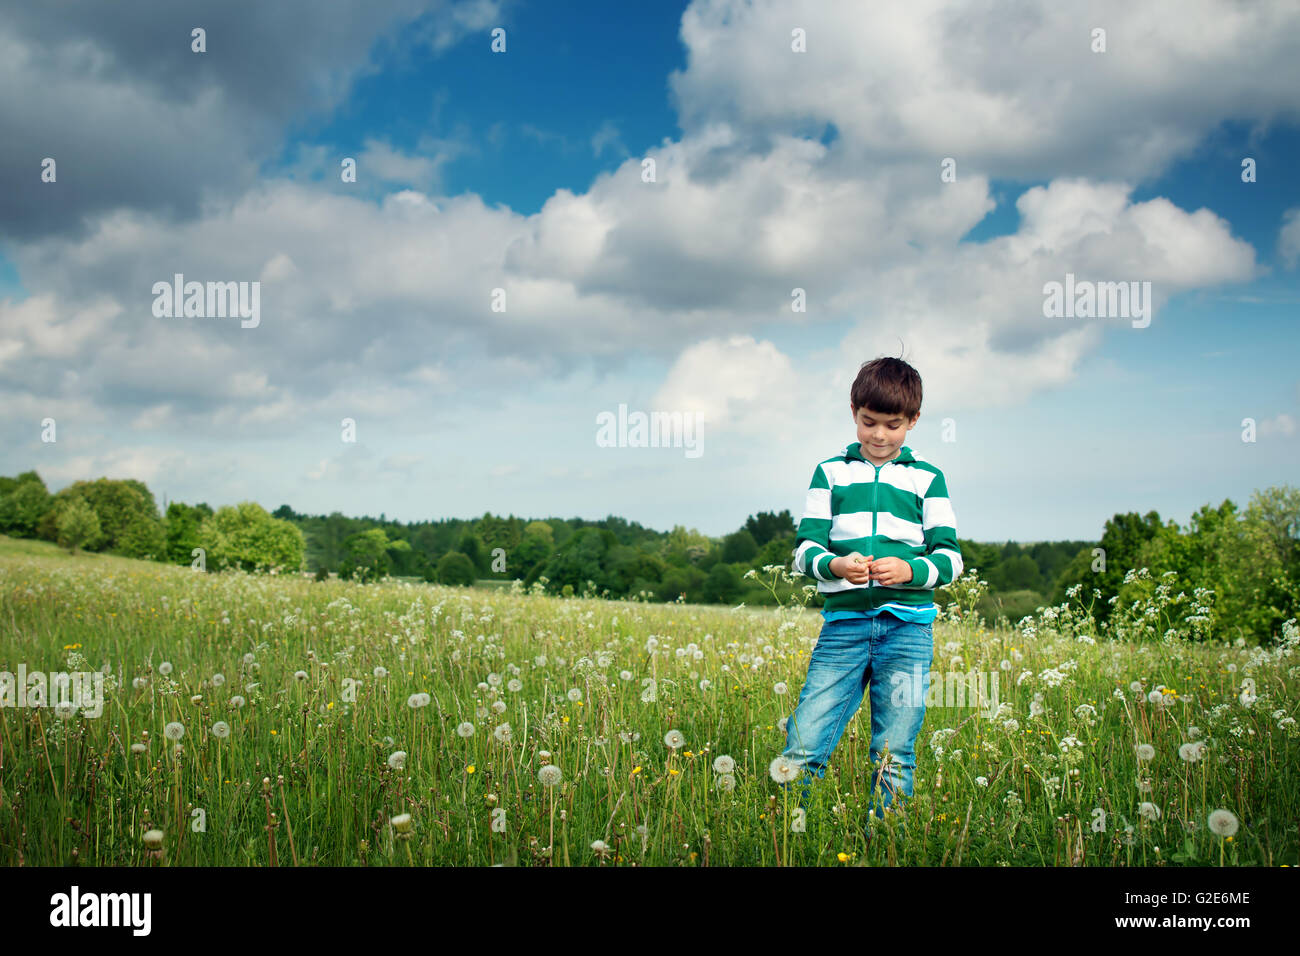 seven years old child standing on the field with dandelions Stock Photo